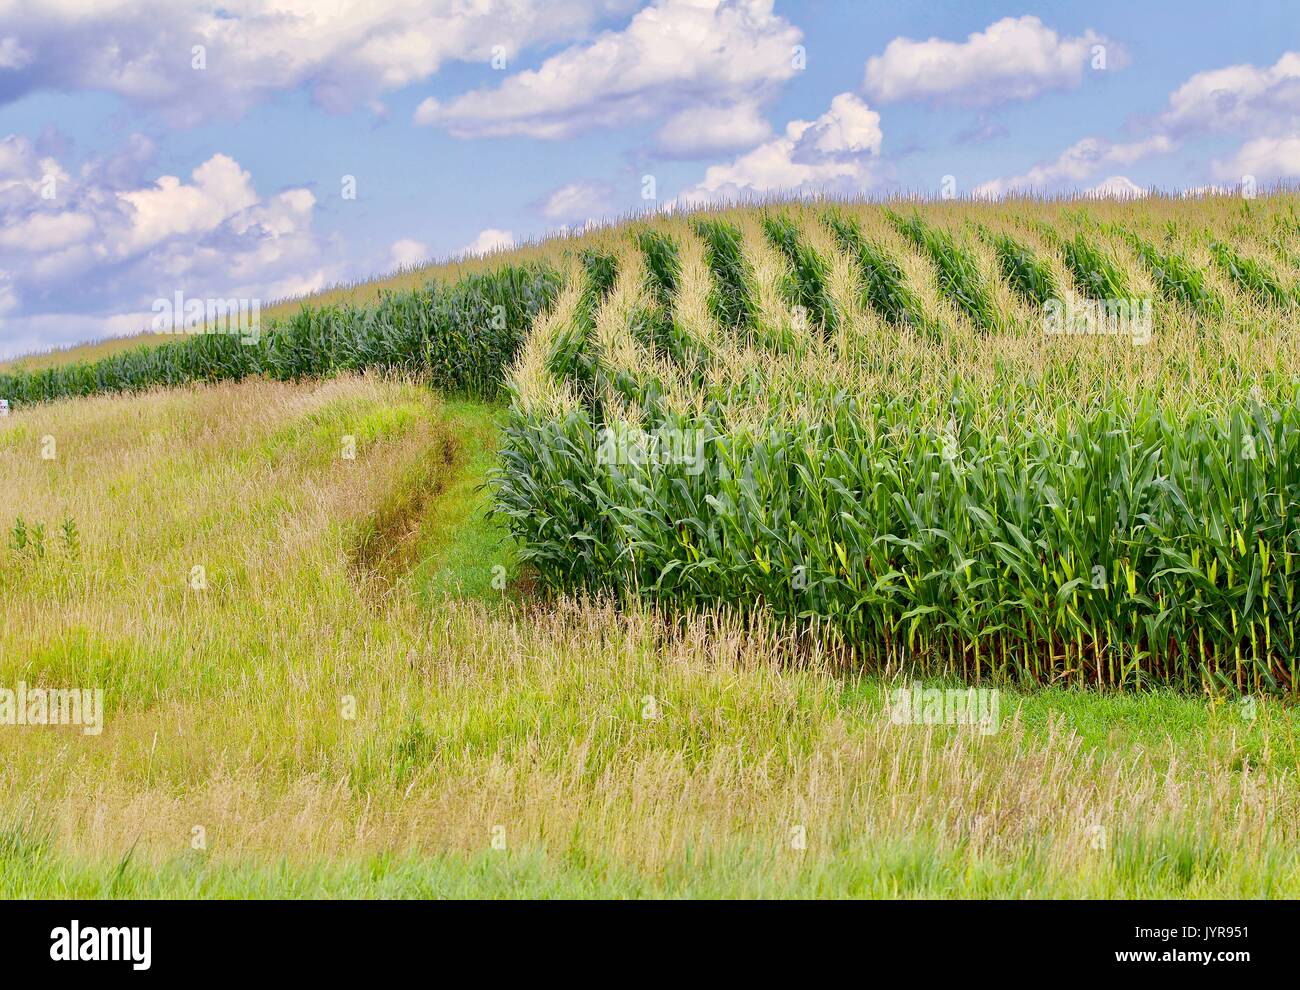 Grassy field, curved rows of green corn Stock Photo